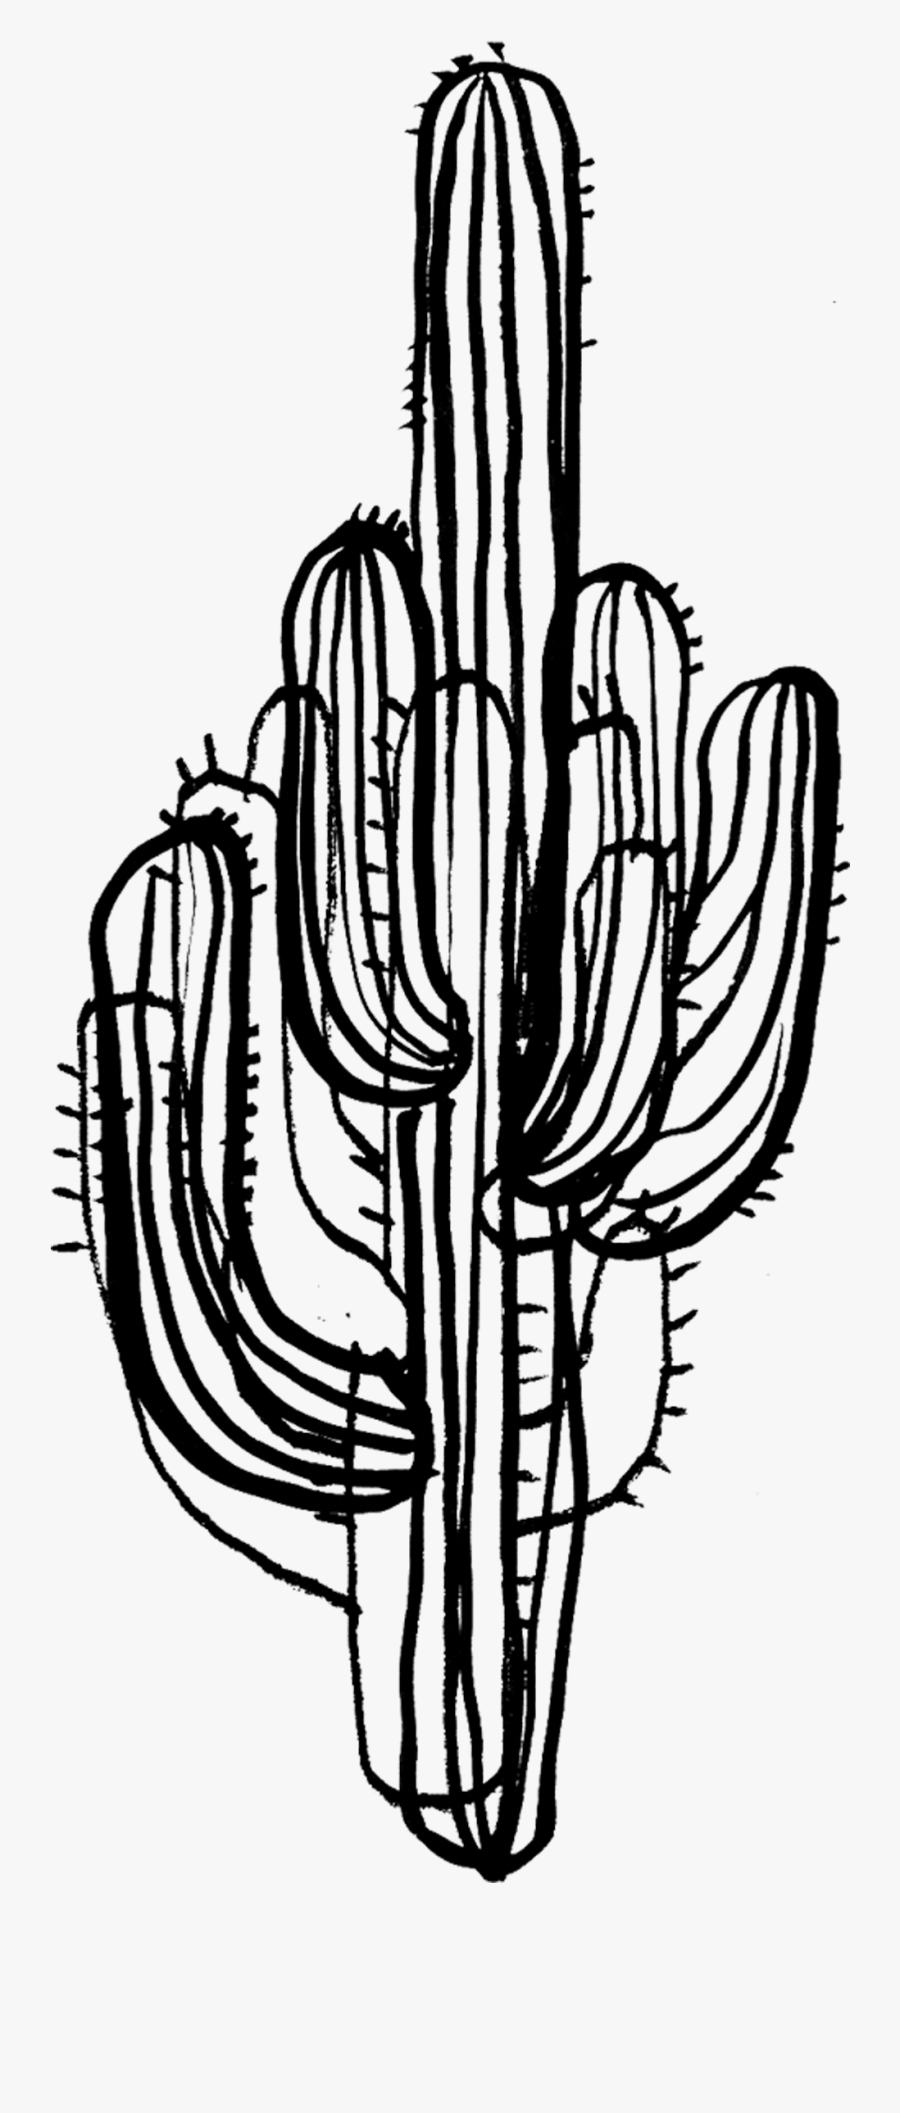 Saguaro Cactus Black And White, free clipart download, png, clipart , c...